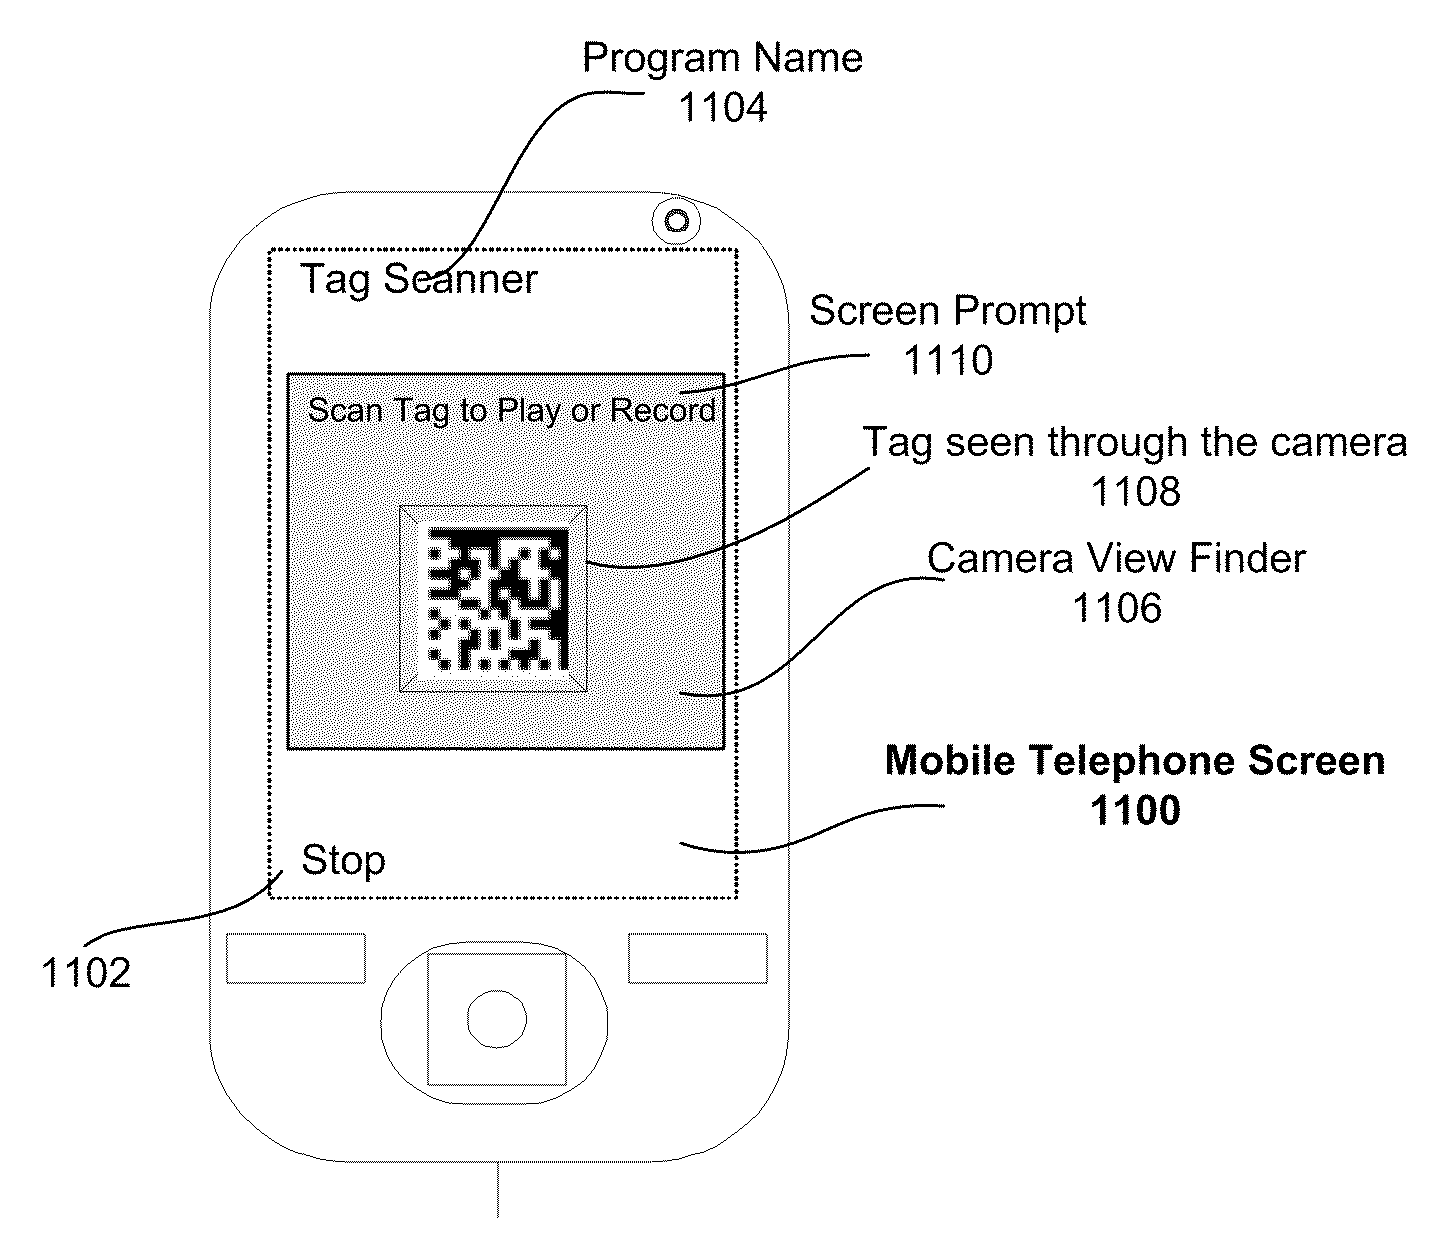 System and Method for Multimedia Storing and Retrieval Using Low-Cost Tags as Virtual Storage Mediums